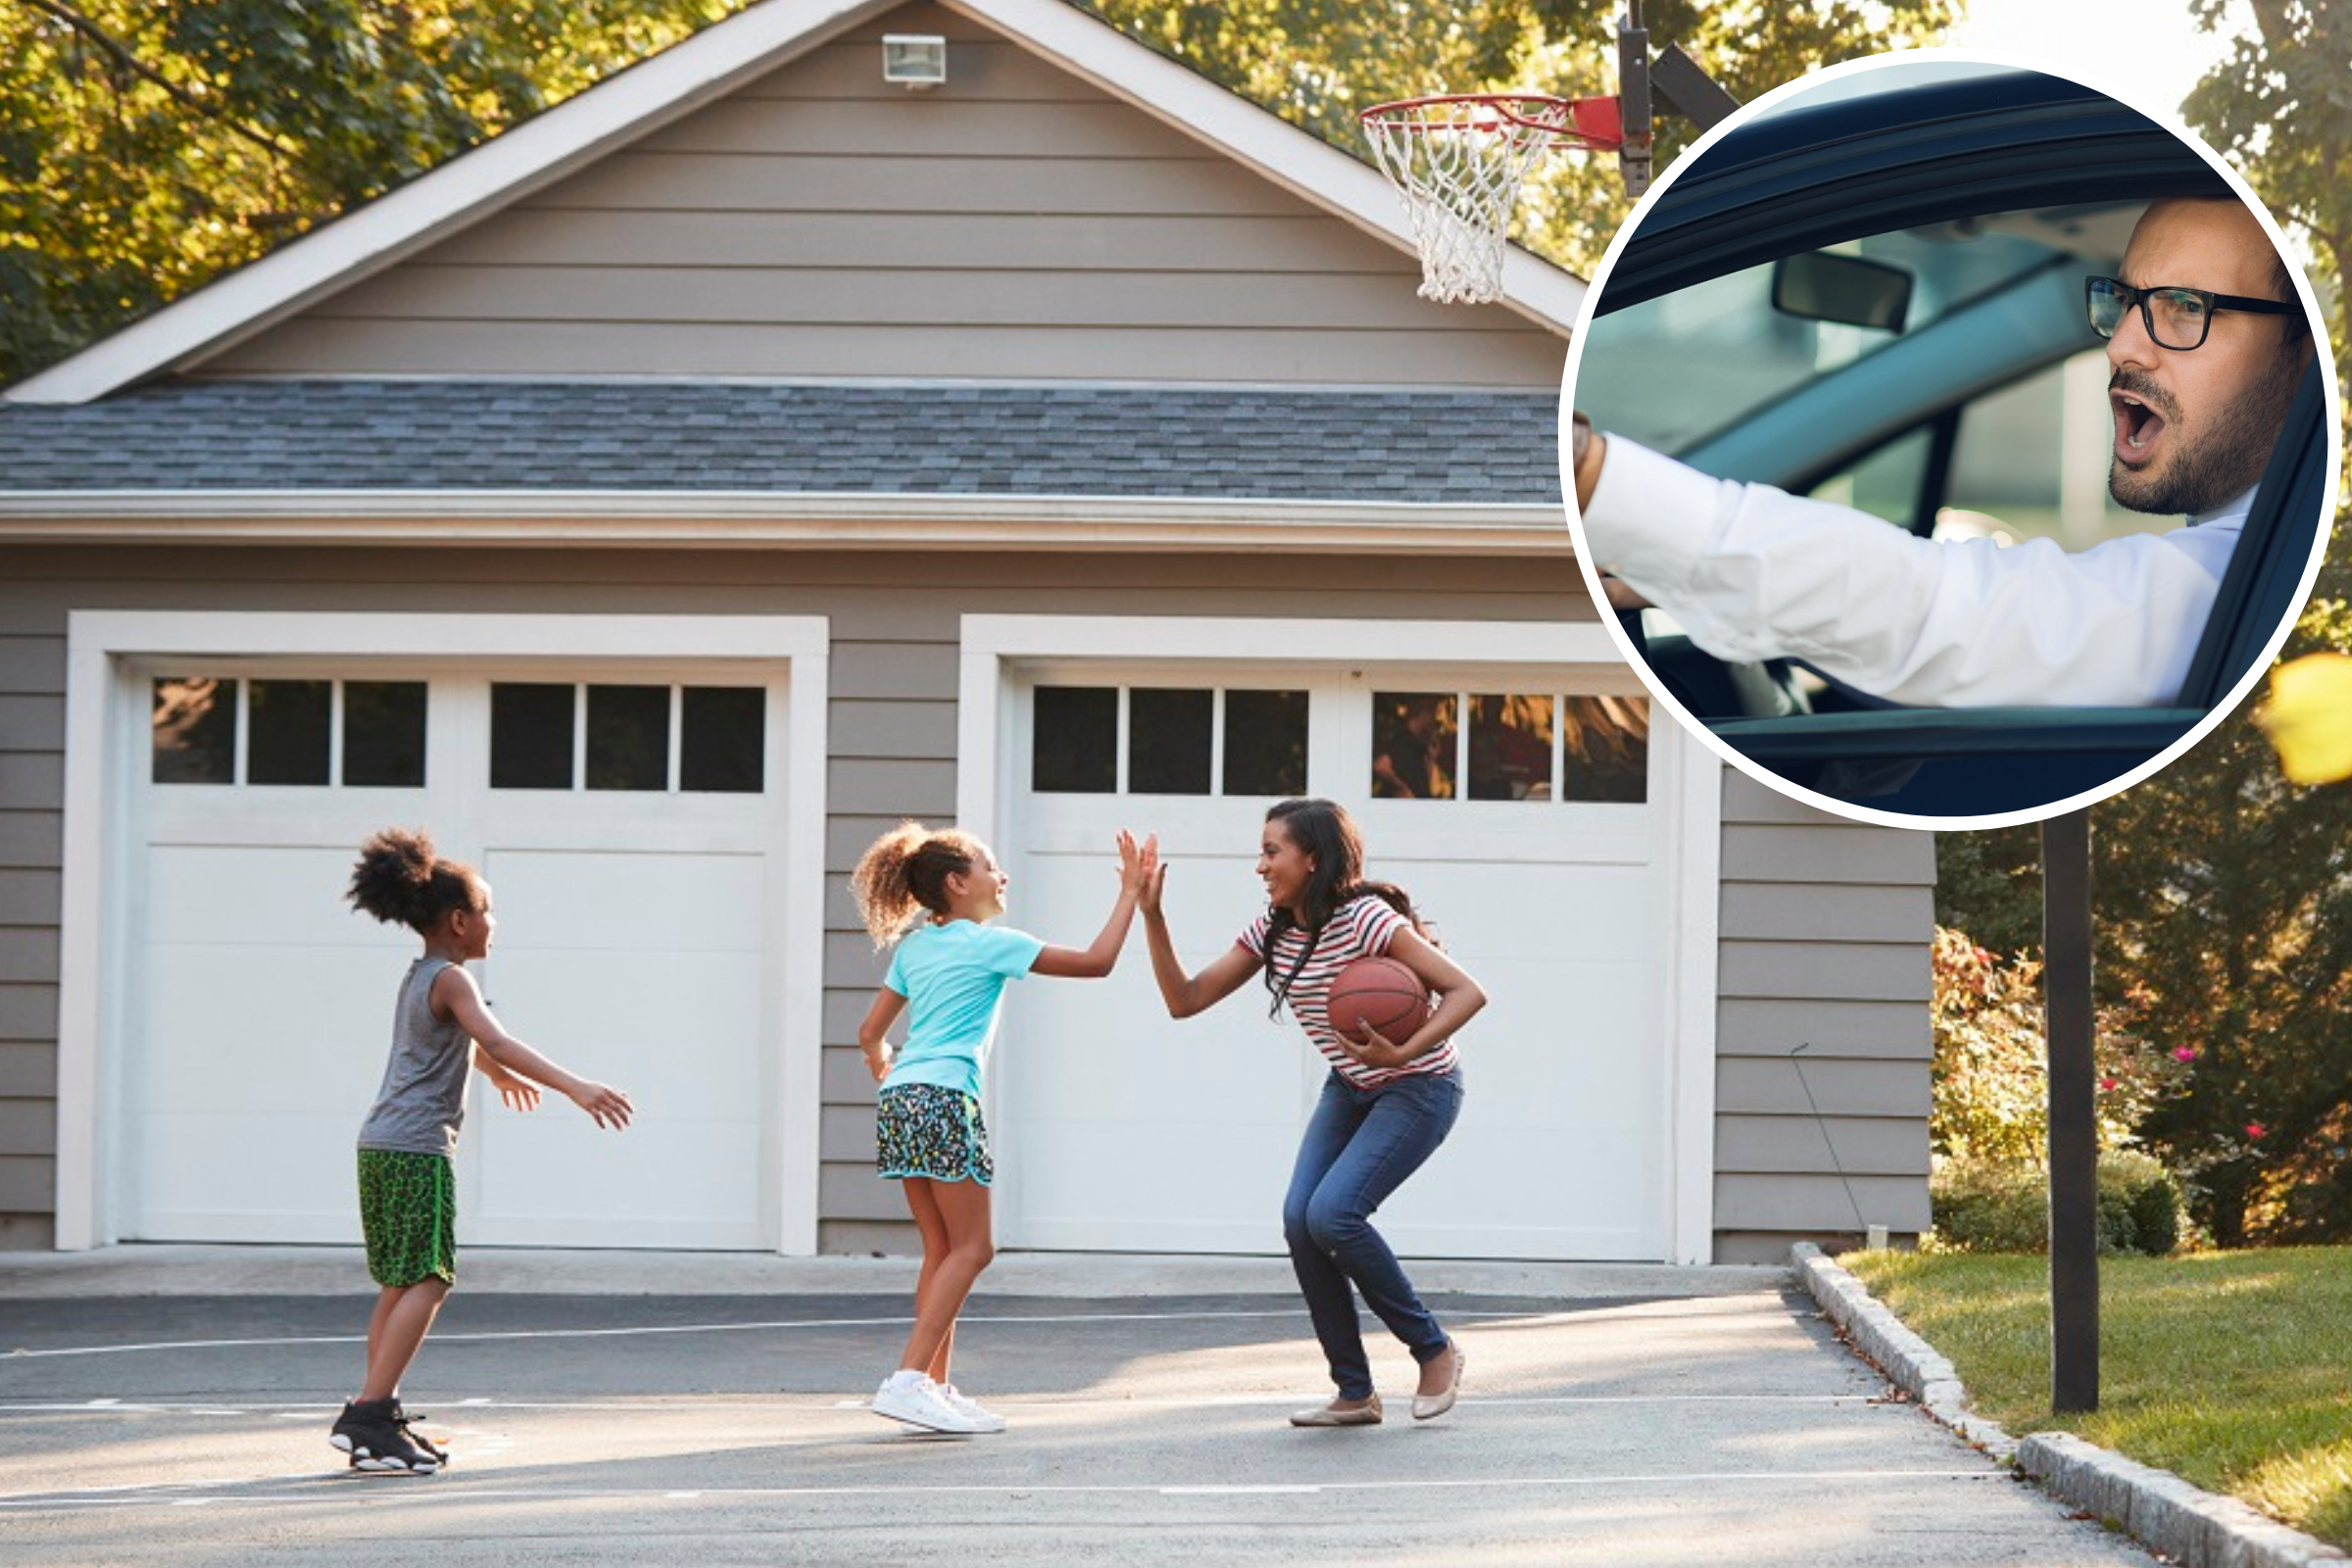 Single Mom Banning Neighbor With Big Family Using Her Driveway Cheered